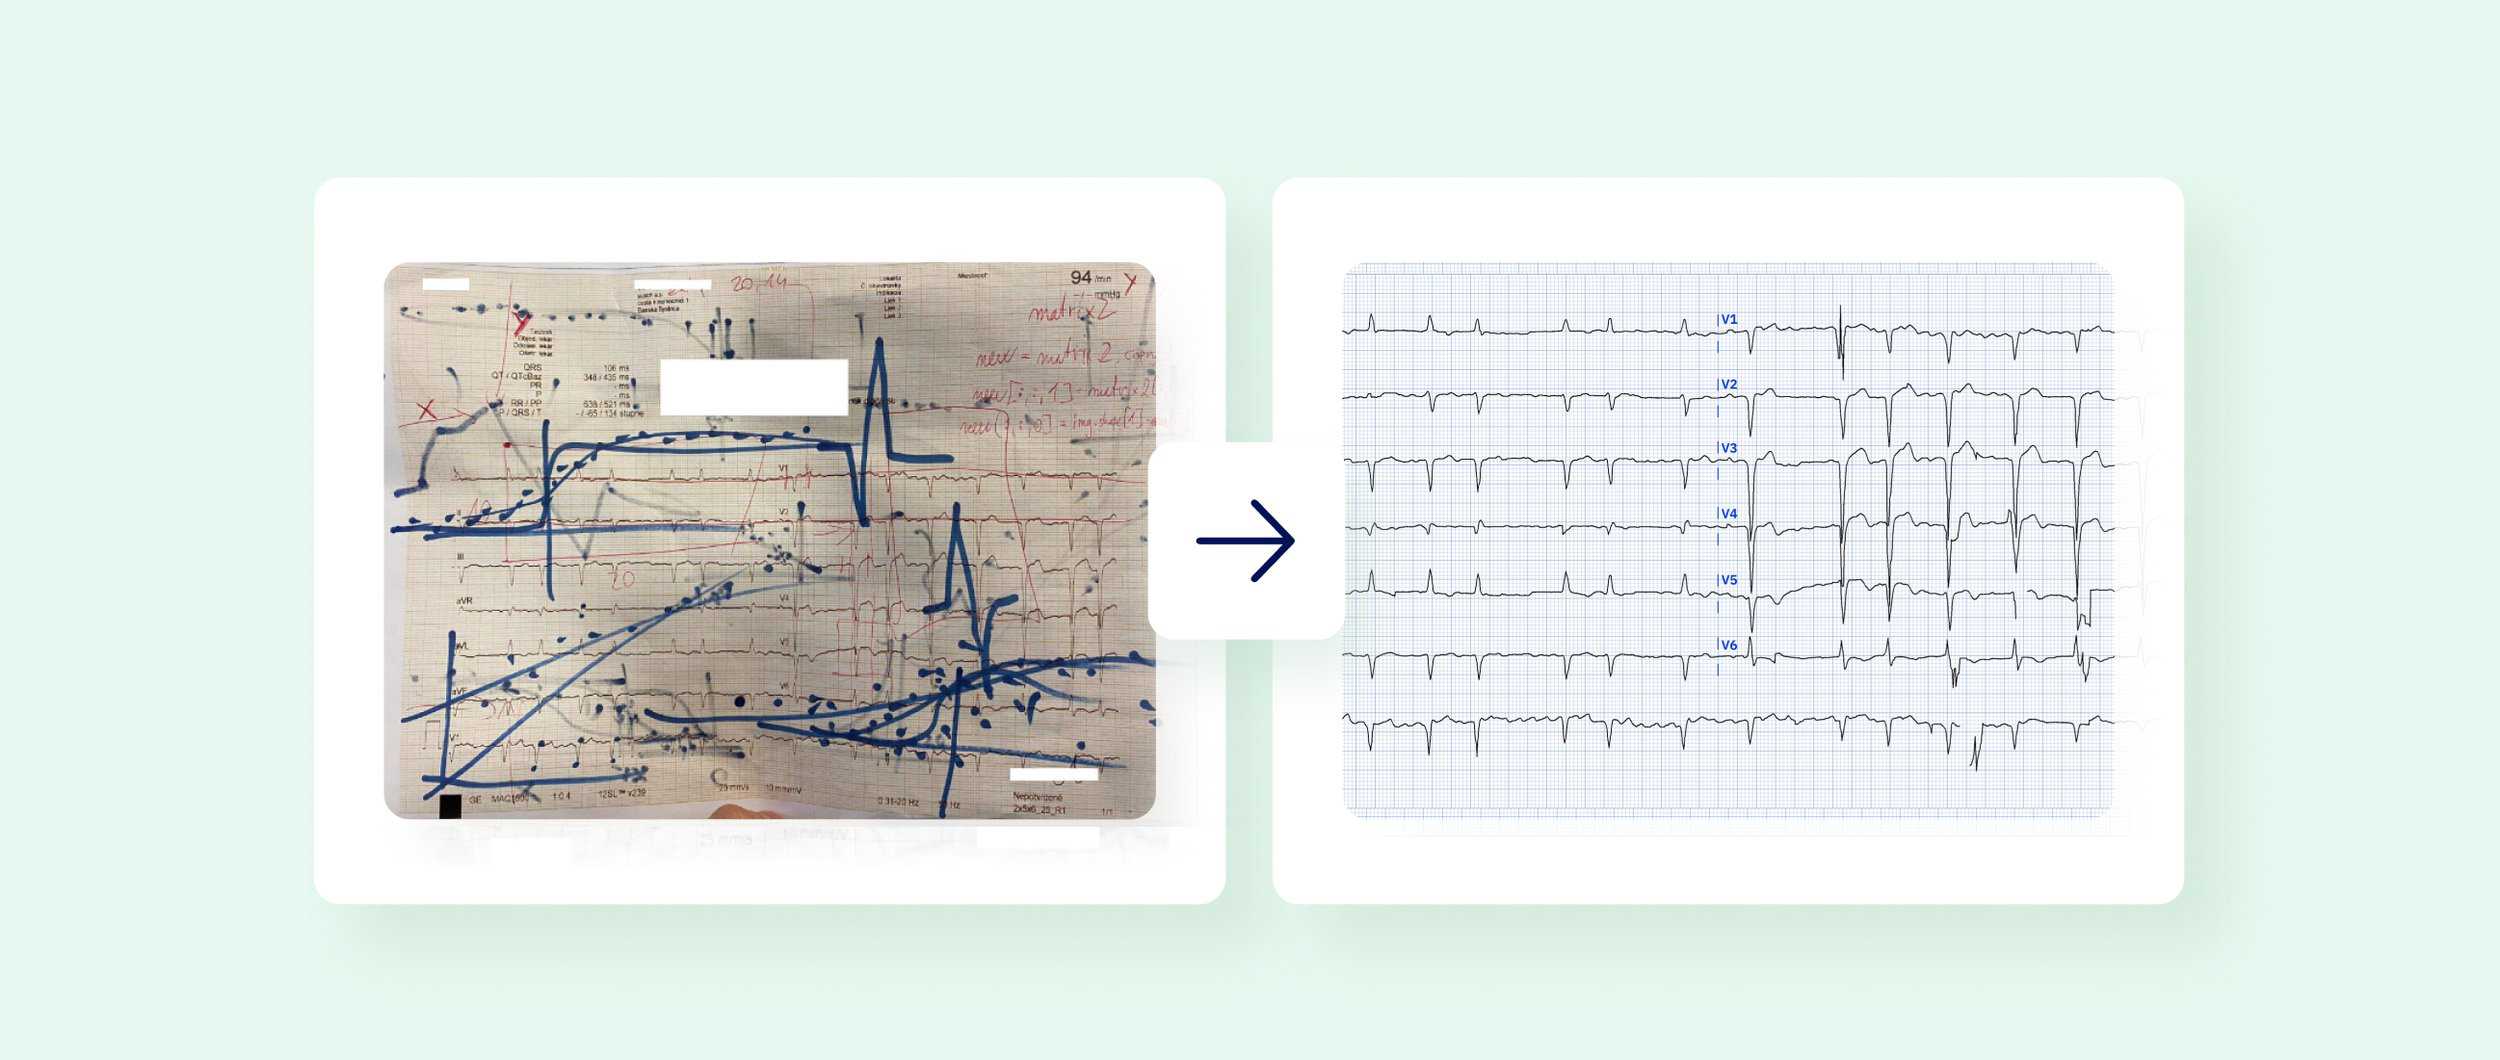 An image of a scribbled over poor-quality ECG and next to it a corrected ECG recording digitized by PMcardio